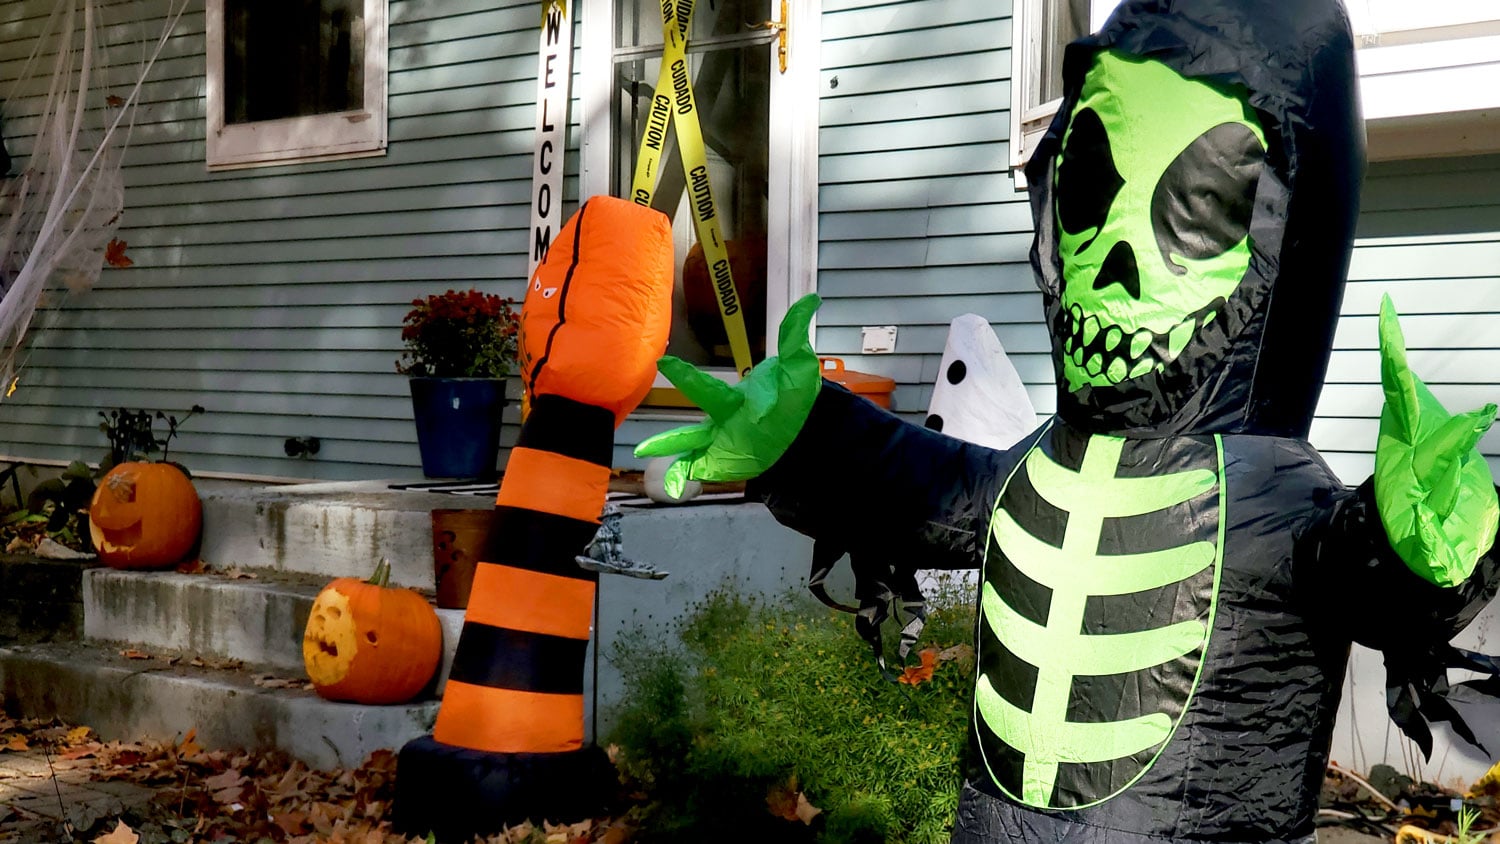 Colorful Halloween decorations.